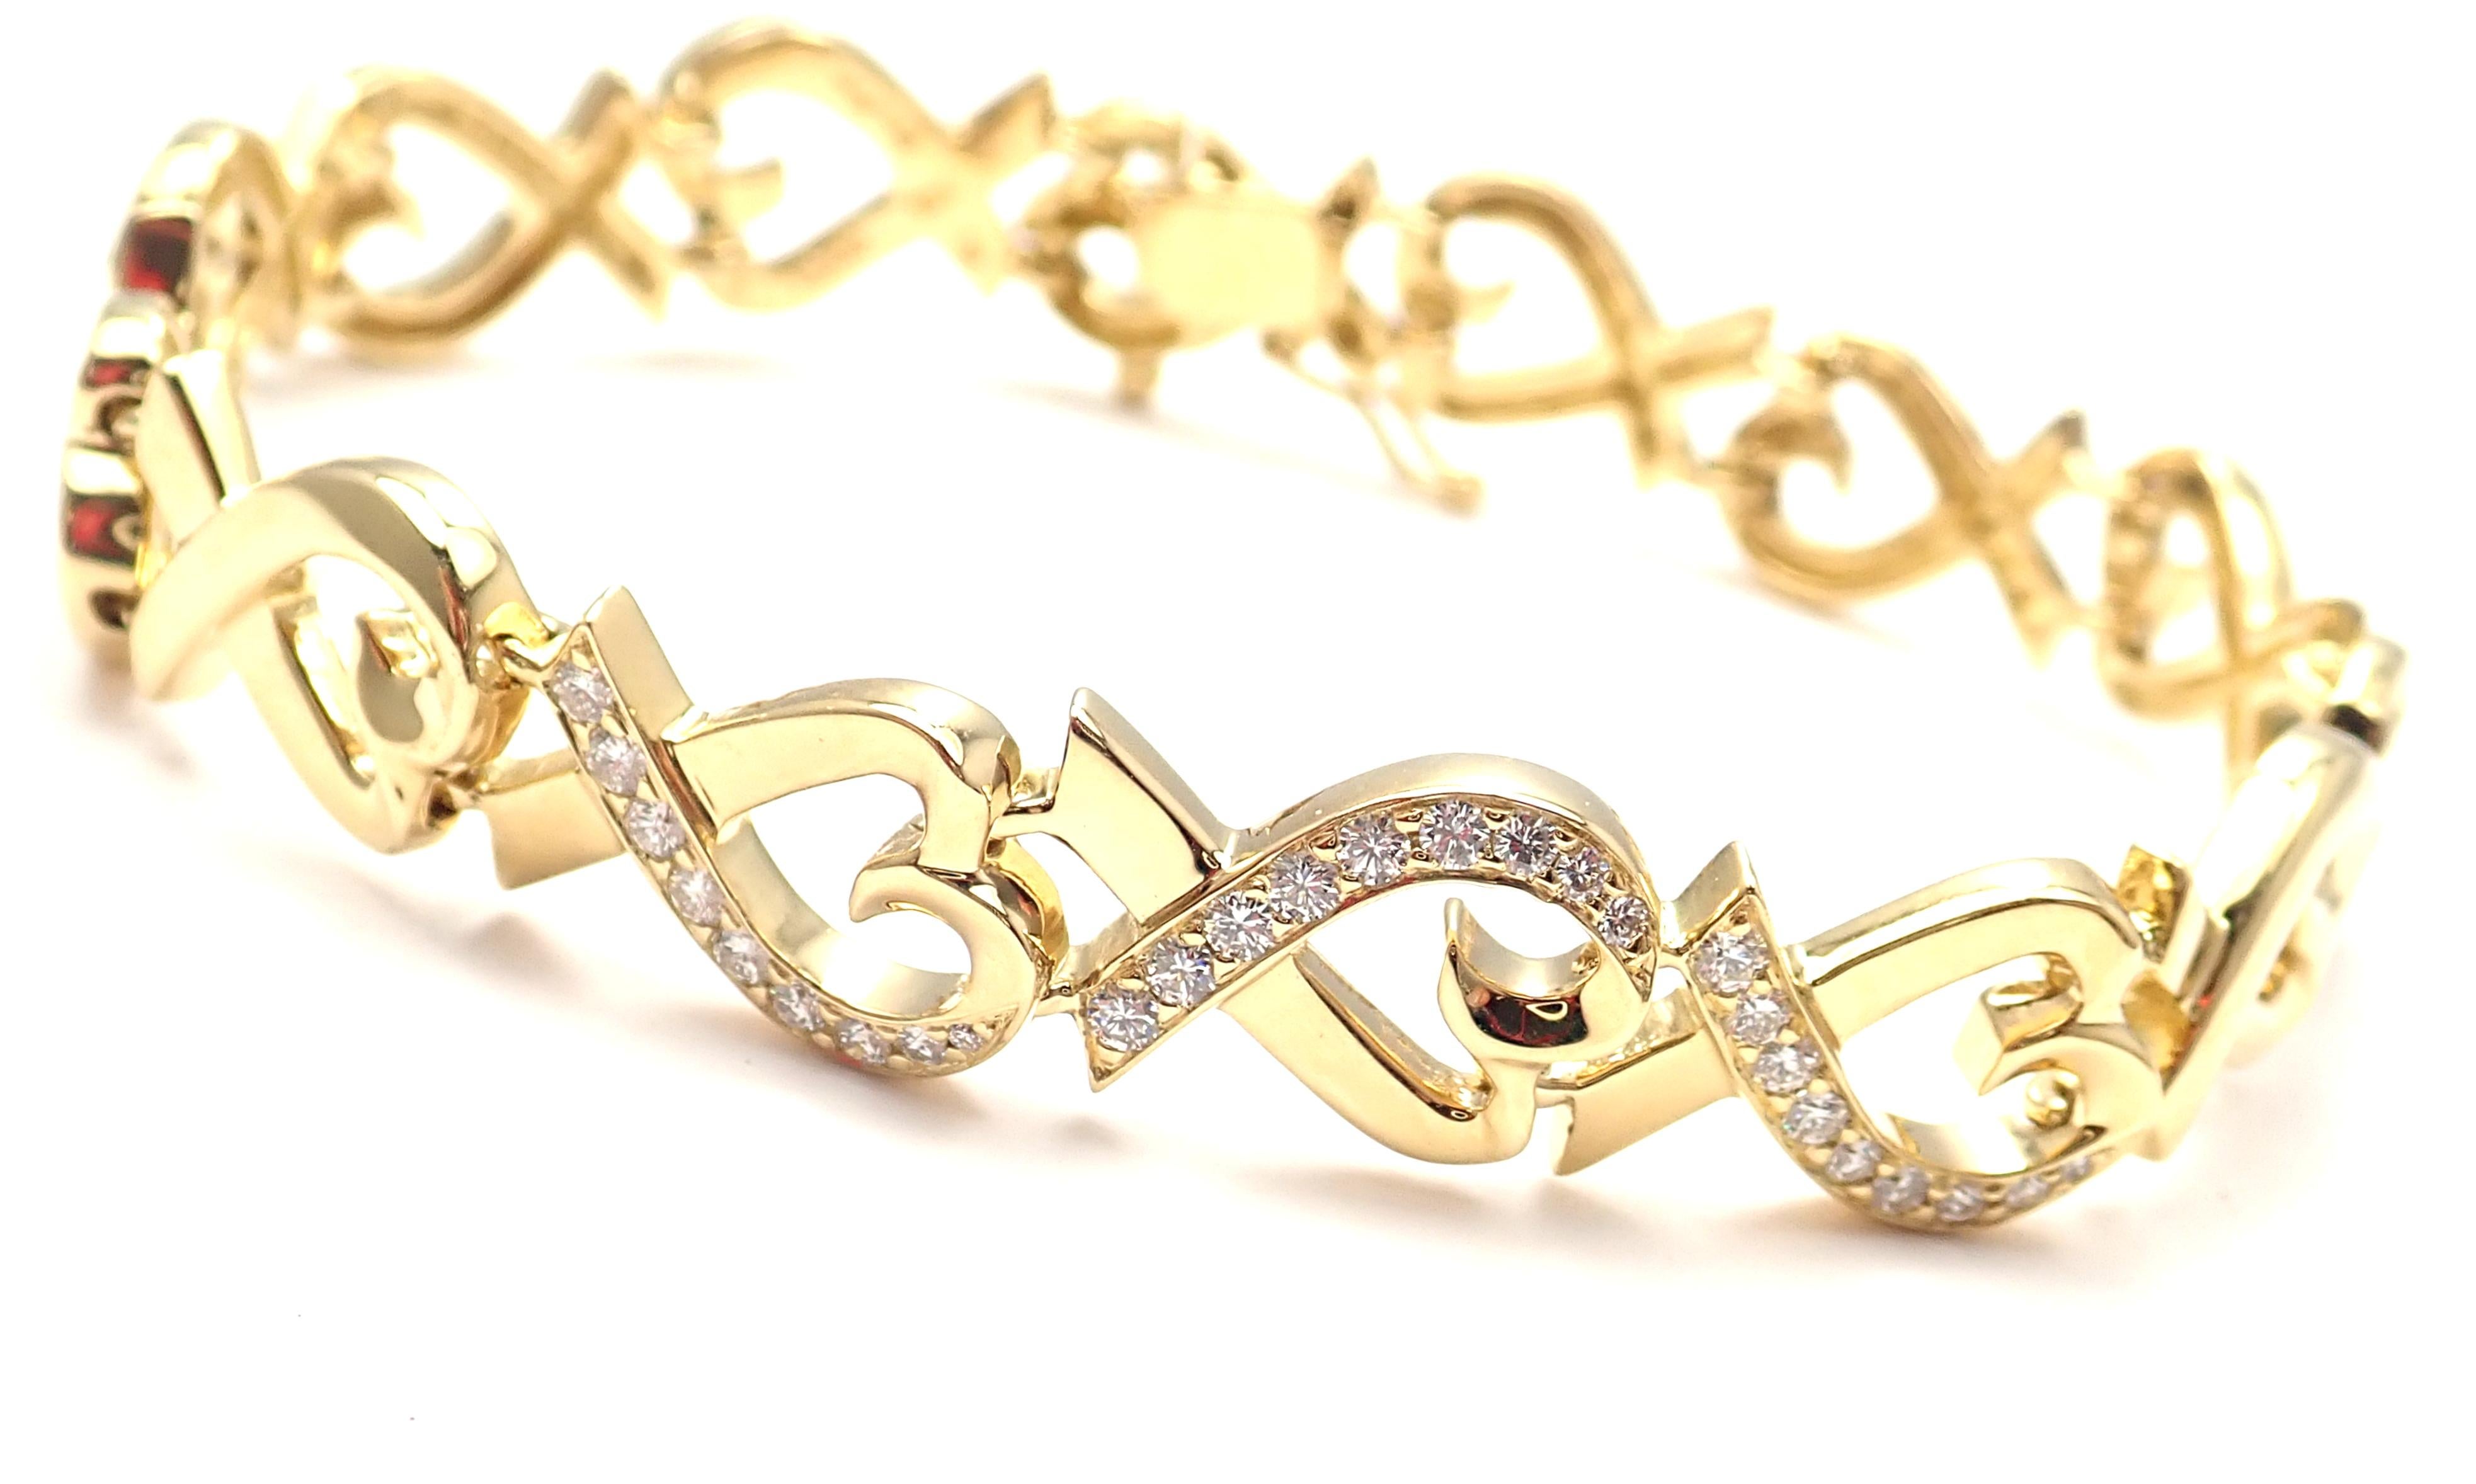 18k Yellow Gold Loving Heart Diamond Bracelet by Paloma Picasso for Tiffany & Co.
With 27 round brilliant cut diamonds VS1 clarity, G color total weight approx. .54ct
Details:
Weight: 27.8 grams
Length: 7